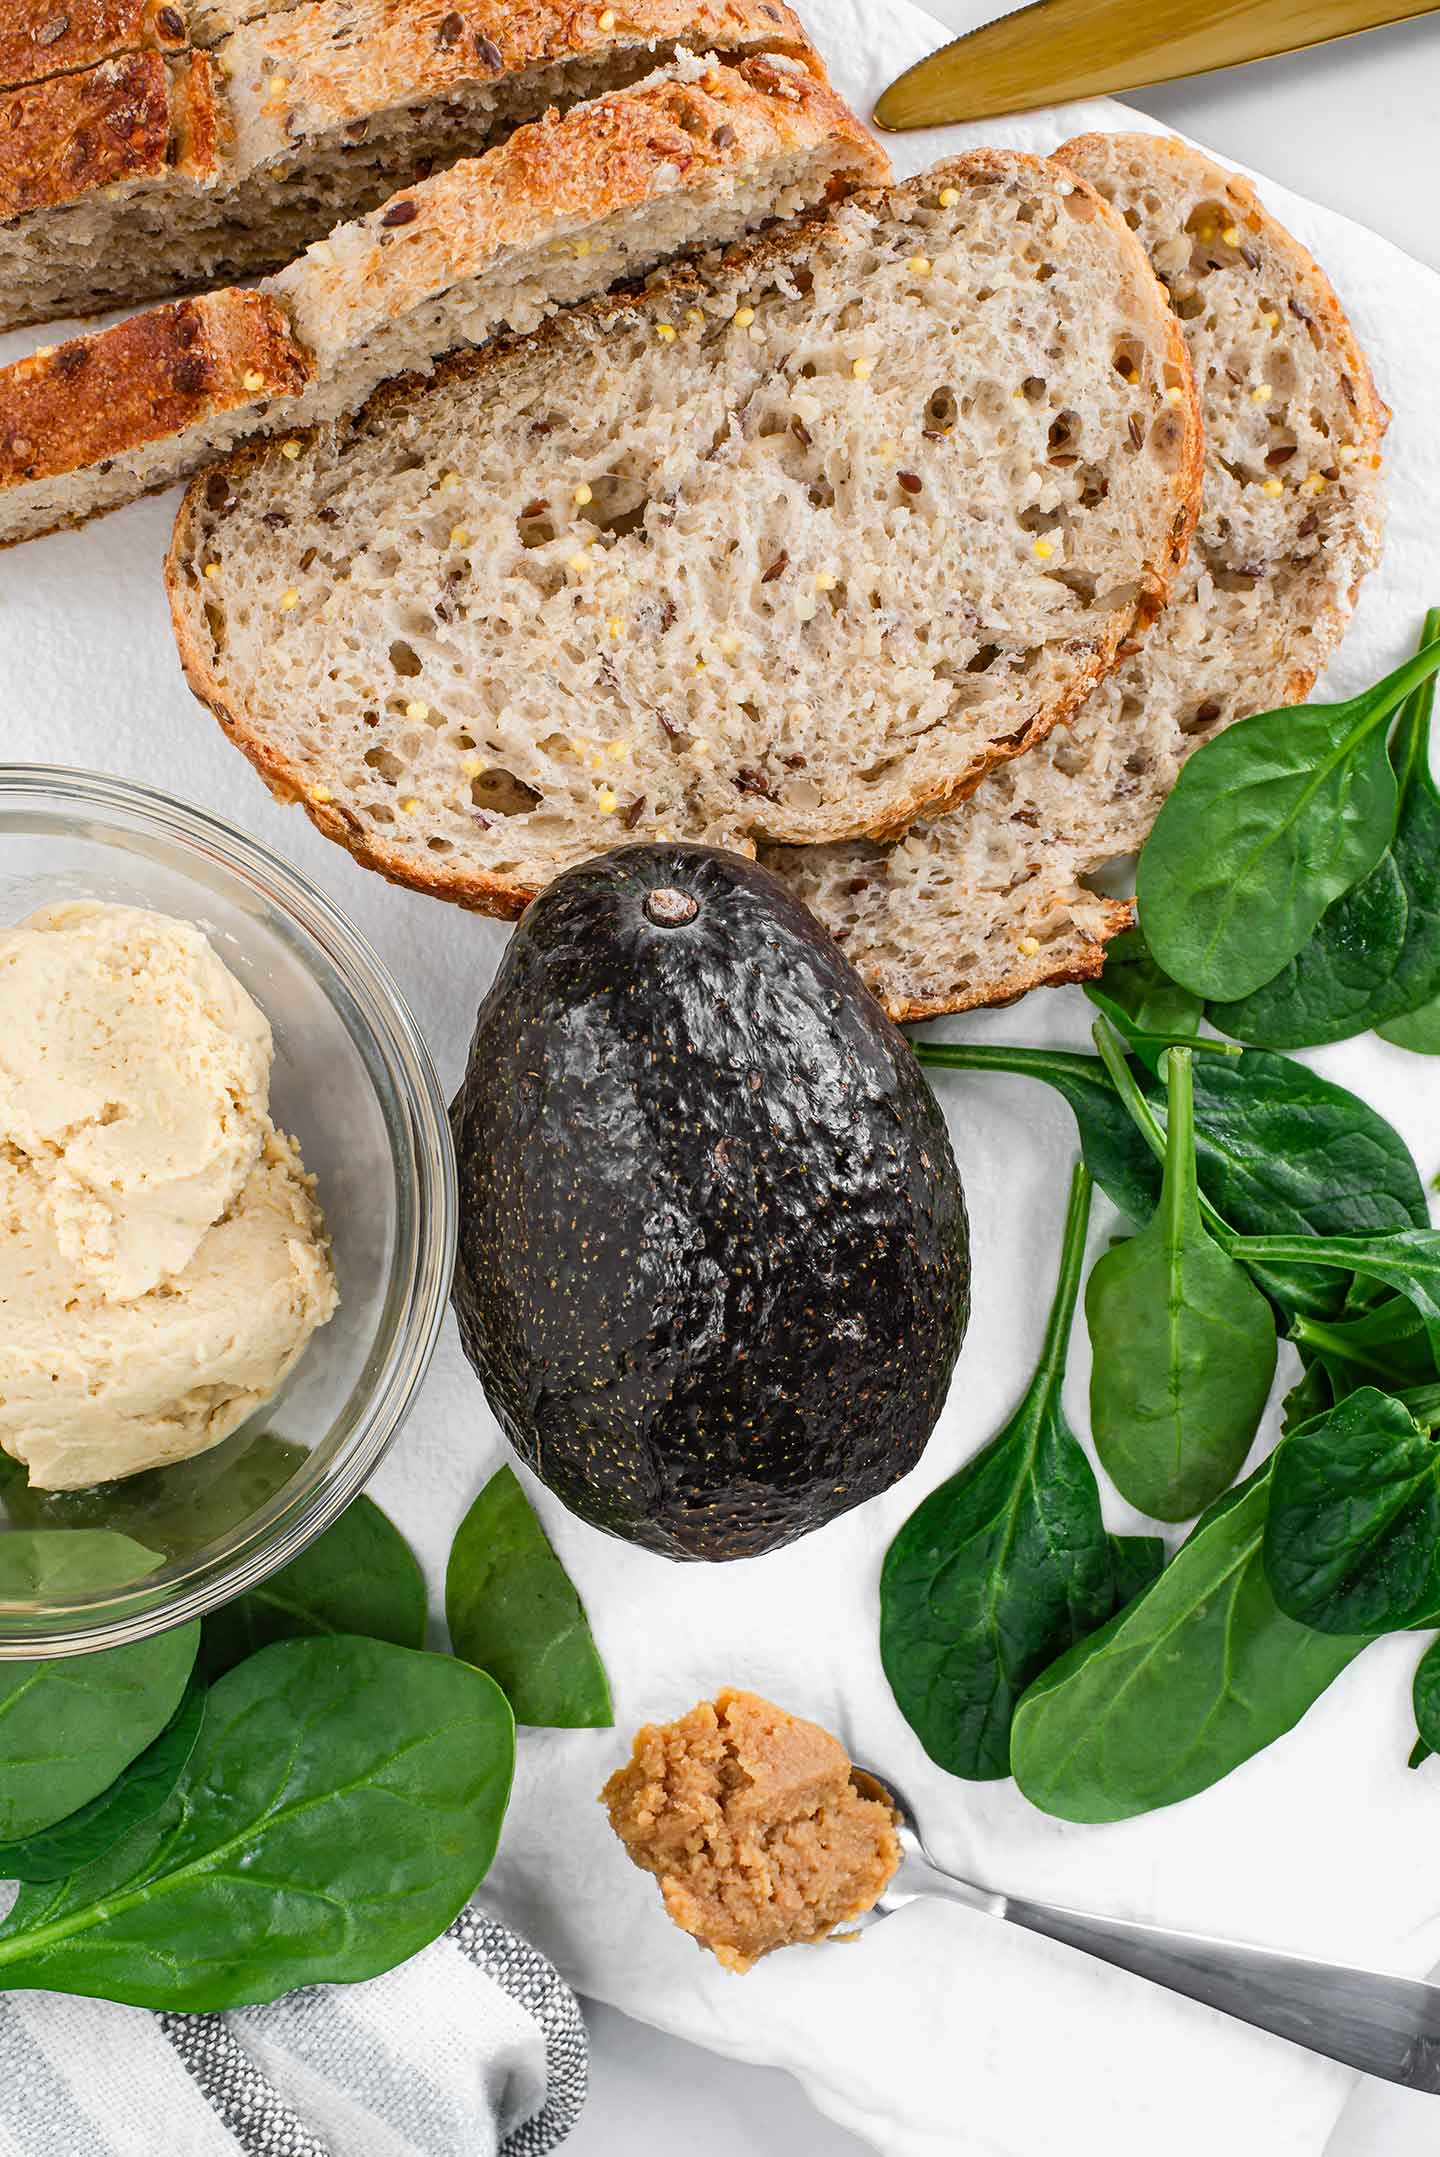 Top down view of an avocado surrounded by spinach leaves, miso paste on a spoon, a small bowl of hummus, and slices of seeded bread.